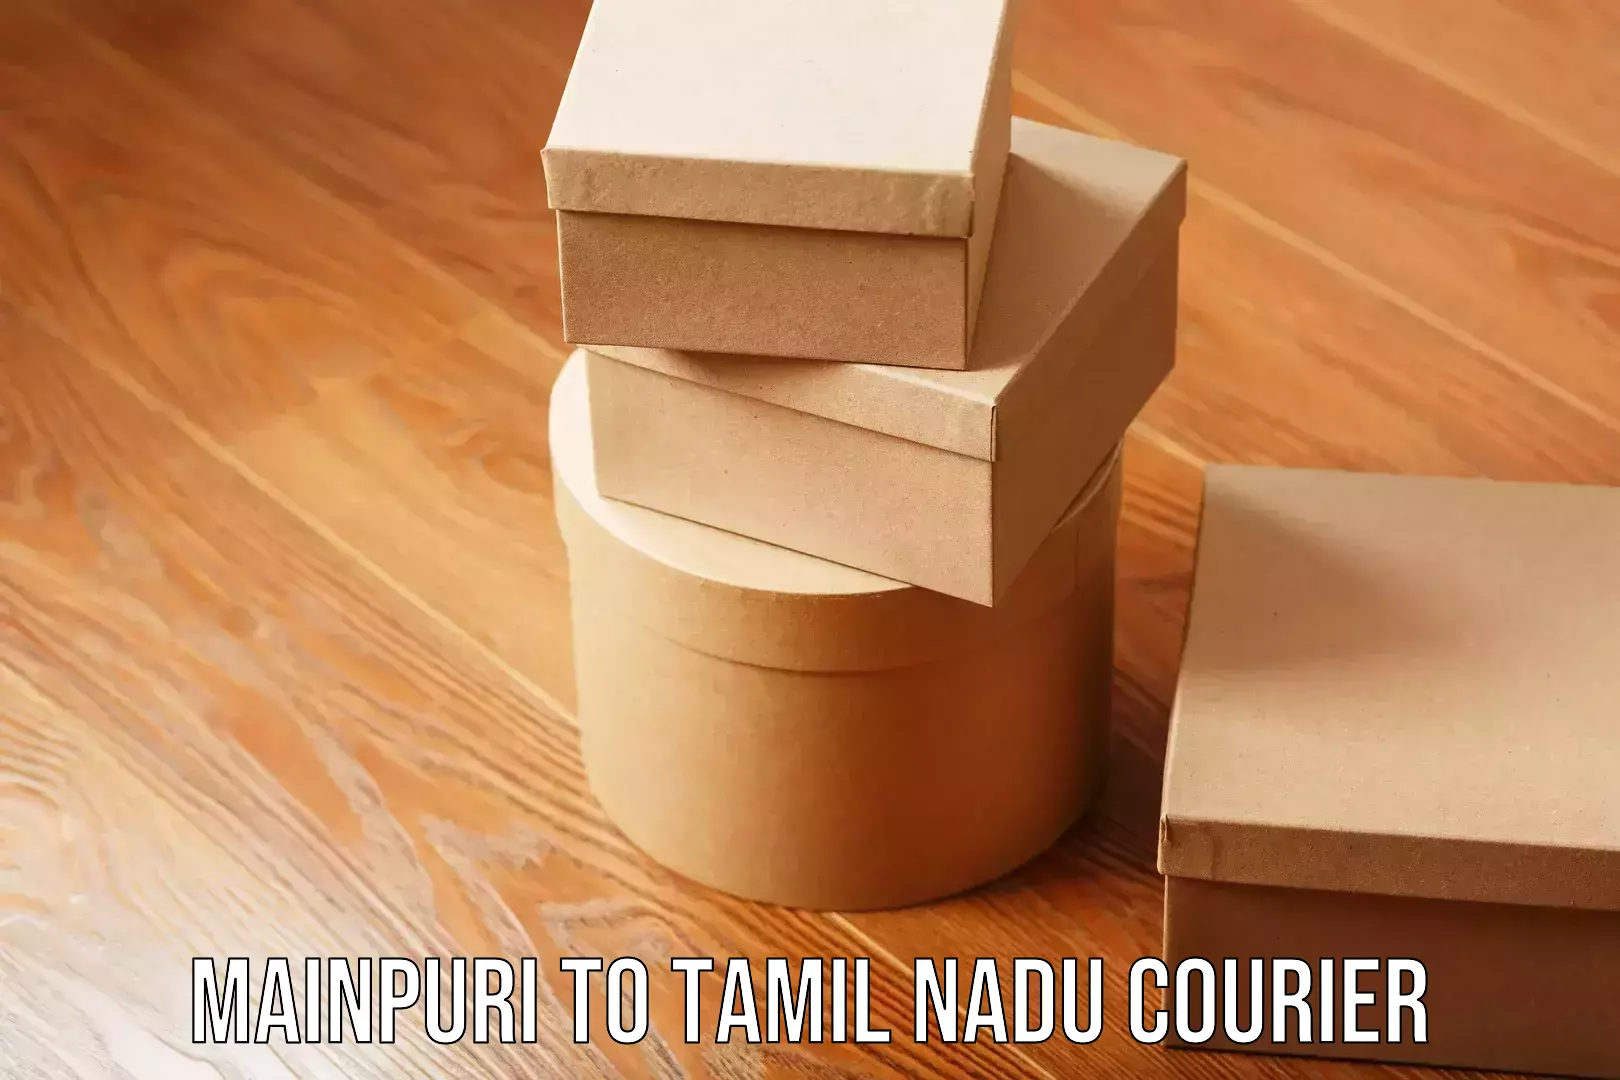 Full home relocation services Mainpuri to Tamil Nadu